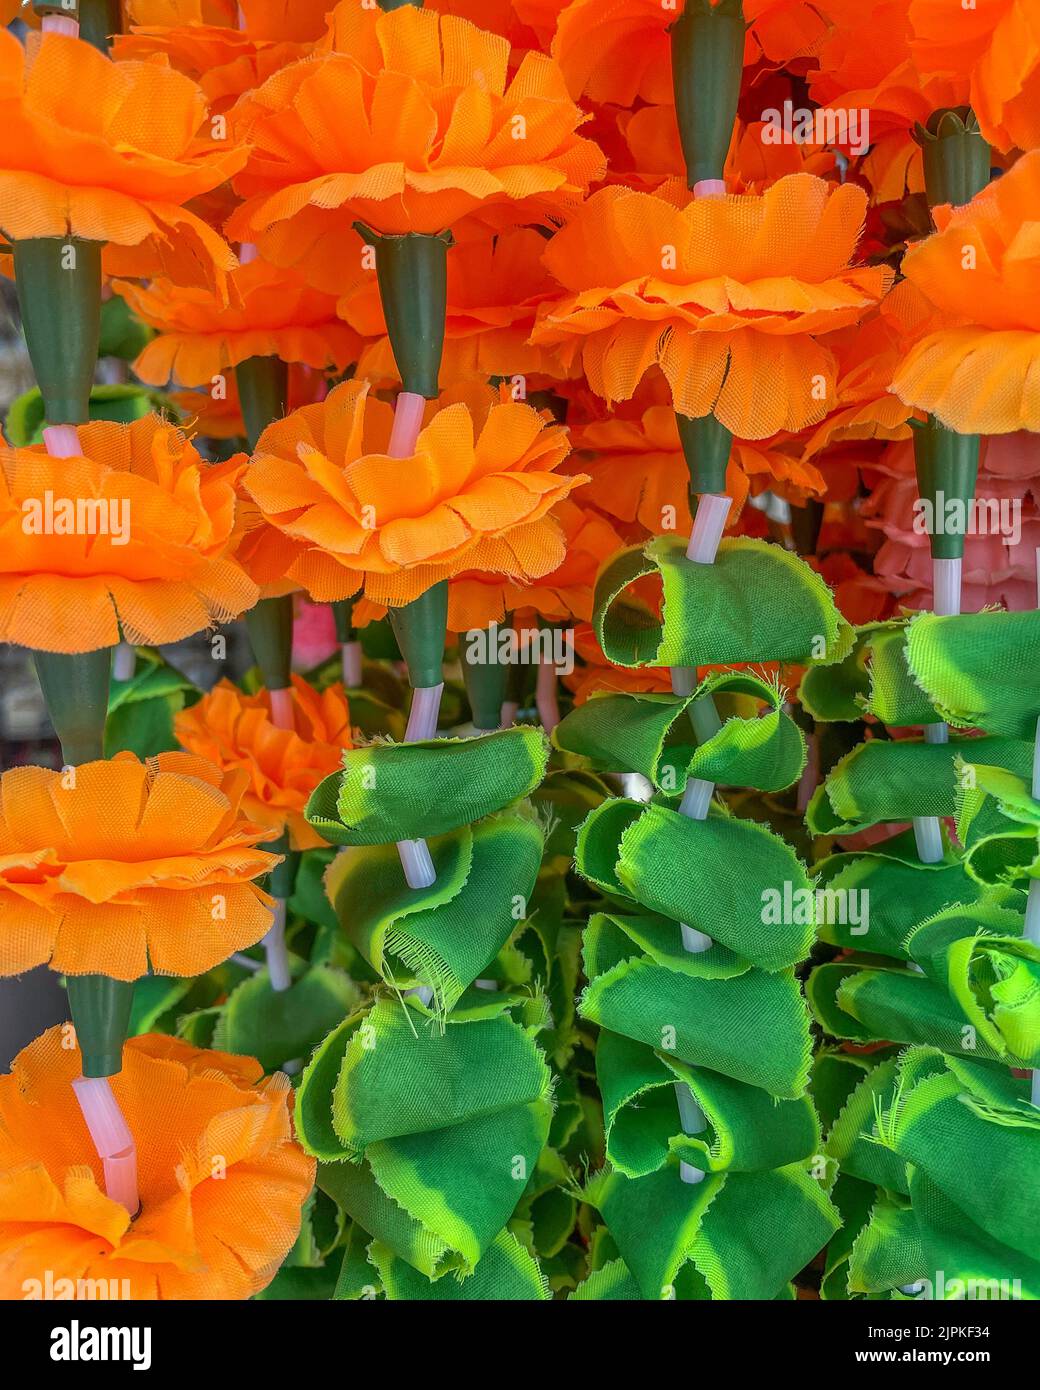 Close up of orange and green cloth flowers. Stock Photo